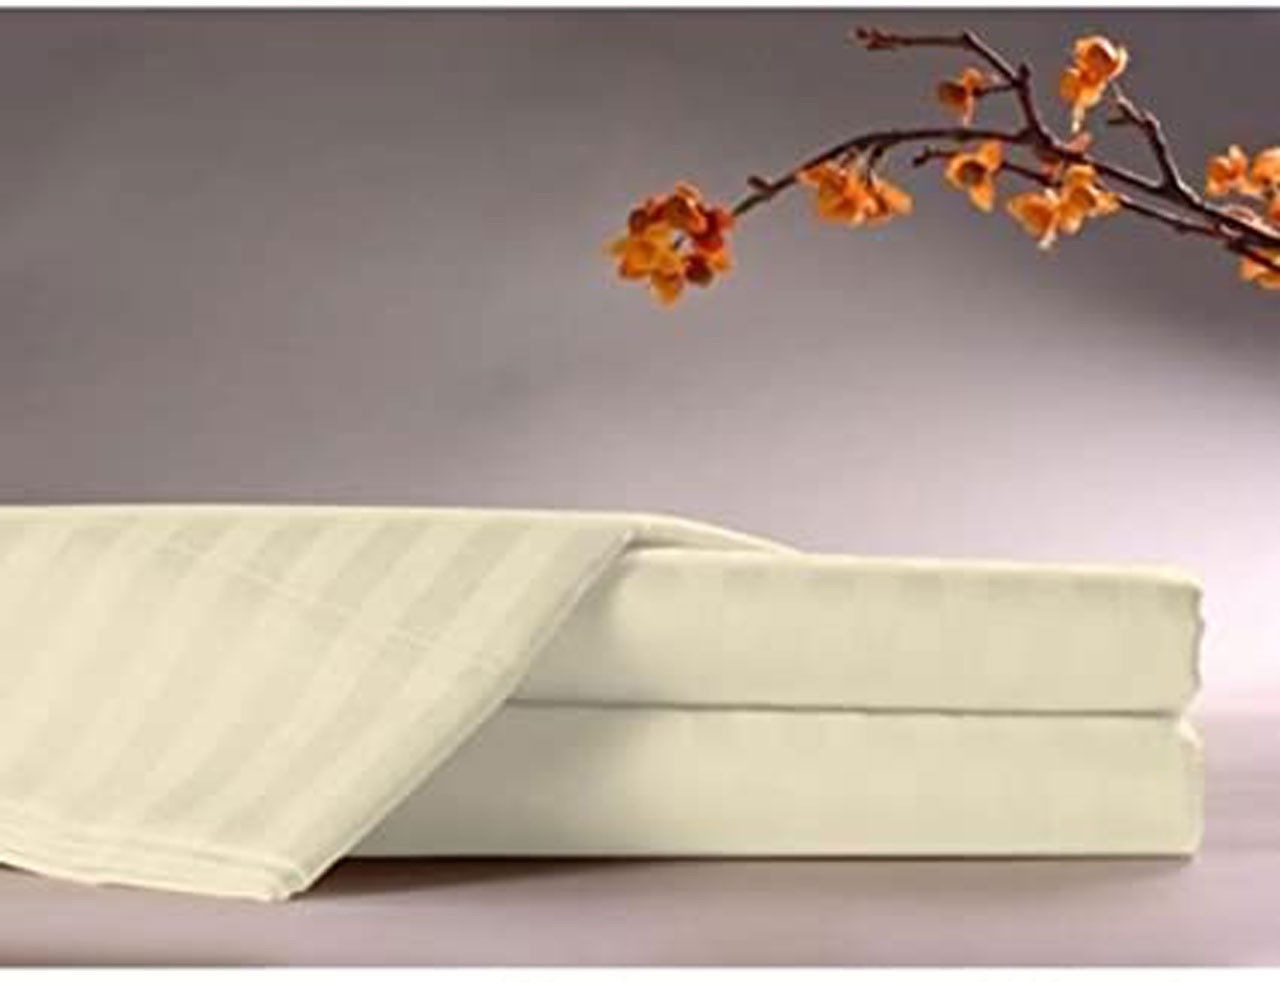 What are the main characteristics of Standard Textile's ComforTwill Tone-on-Tone Bone Sheets?